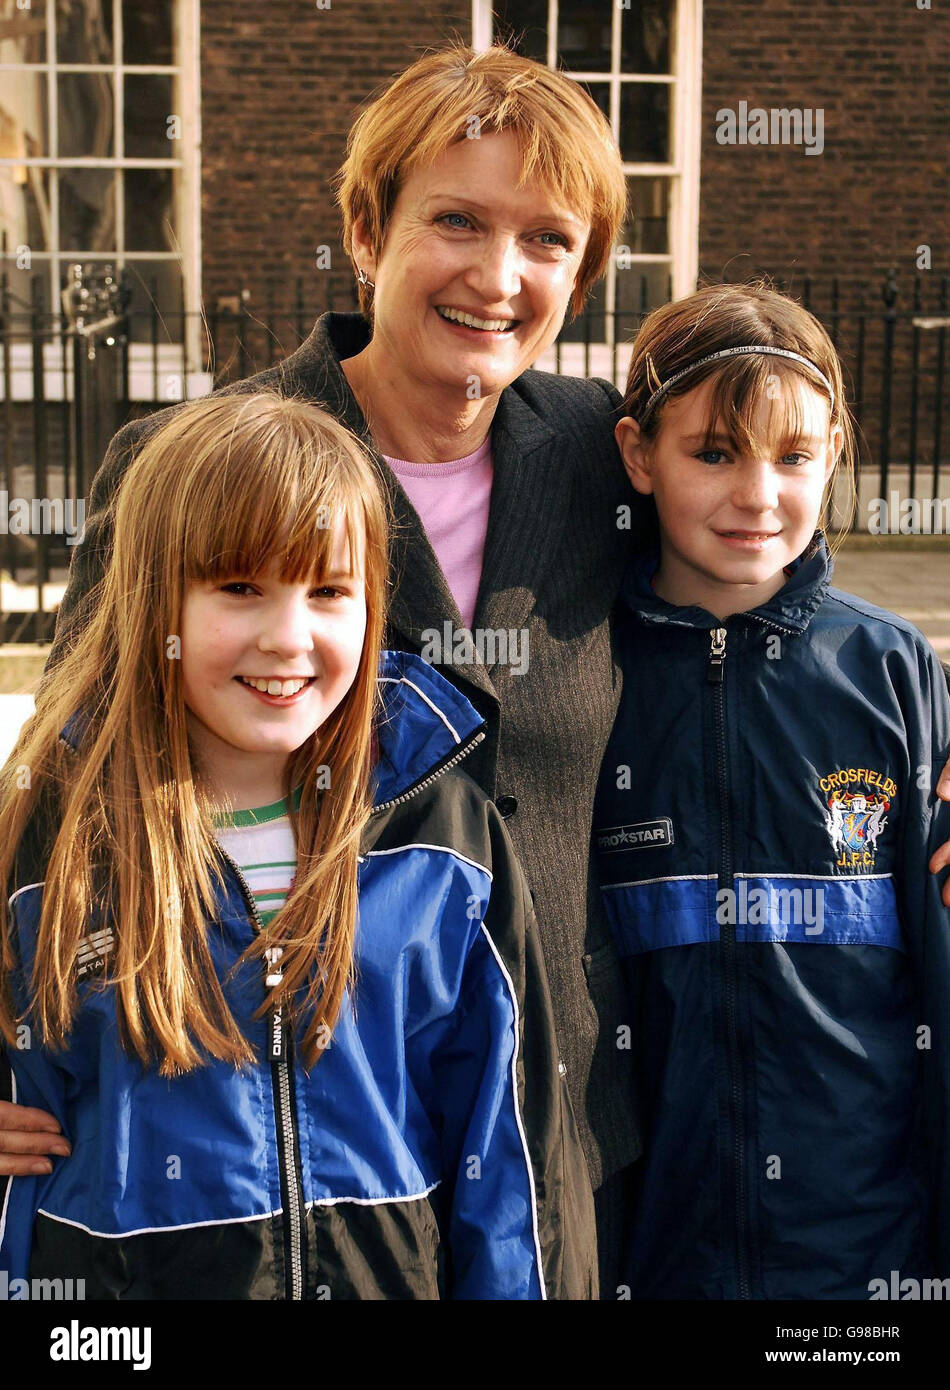 Minnie Cruttwell (left) aged 11 from South London, with Tessa Jowell the Minister for Culture Sport and Media, and Hannah Dale (right) aged 11 from Warrington Cheshire, at the Football Association Headquaters in Central London, Monday 13 vMarch 2005. The three were at the FA to clarify their position on girls continuing to play with their boys team, after Minnie wrote a letter to the Minister for sport wanting to know why she was unable to continue to play with her boys team the 'Balham Blazers' because of the FA rules which stated that after turning 12 she must play in an all girls team. Stock Photo